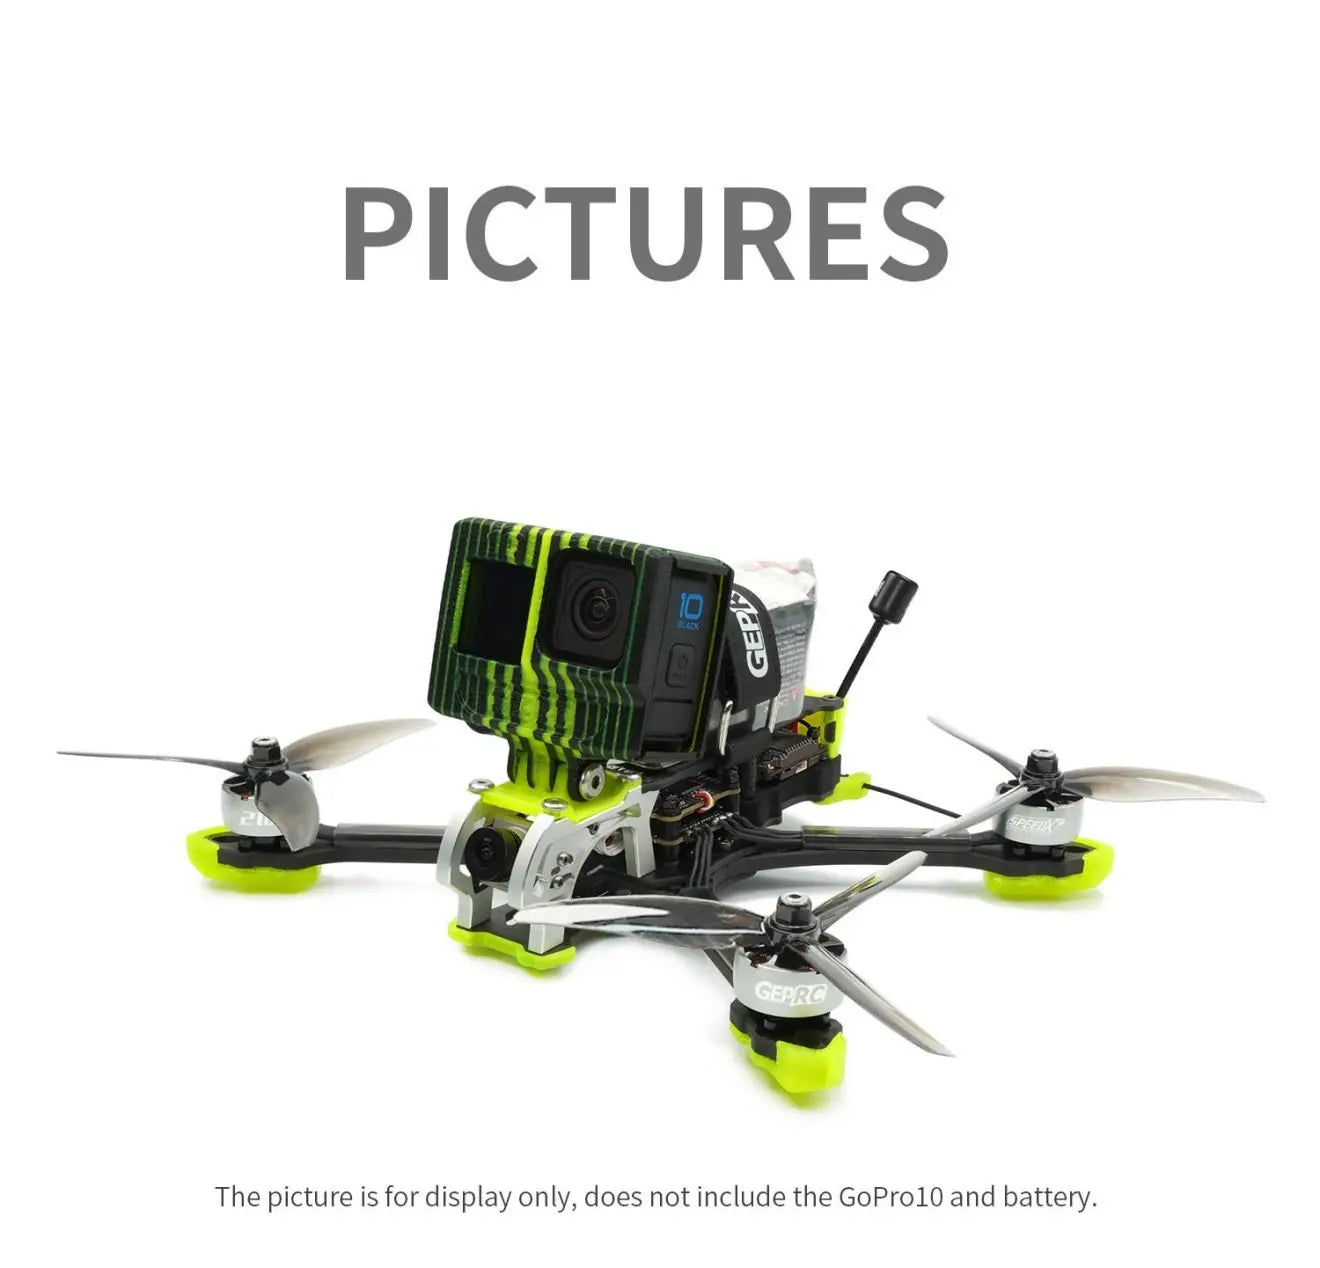 MARK5 HD AVATAR Freestyle FPV Drone, PICTURES I0 GE;RC The picture is for display only, does not